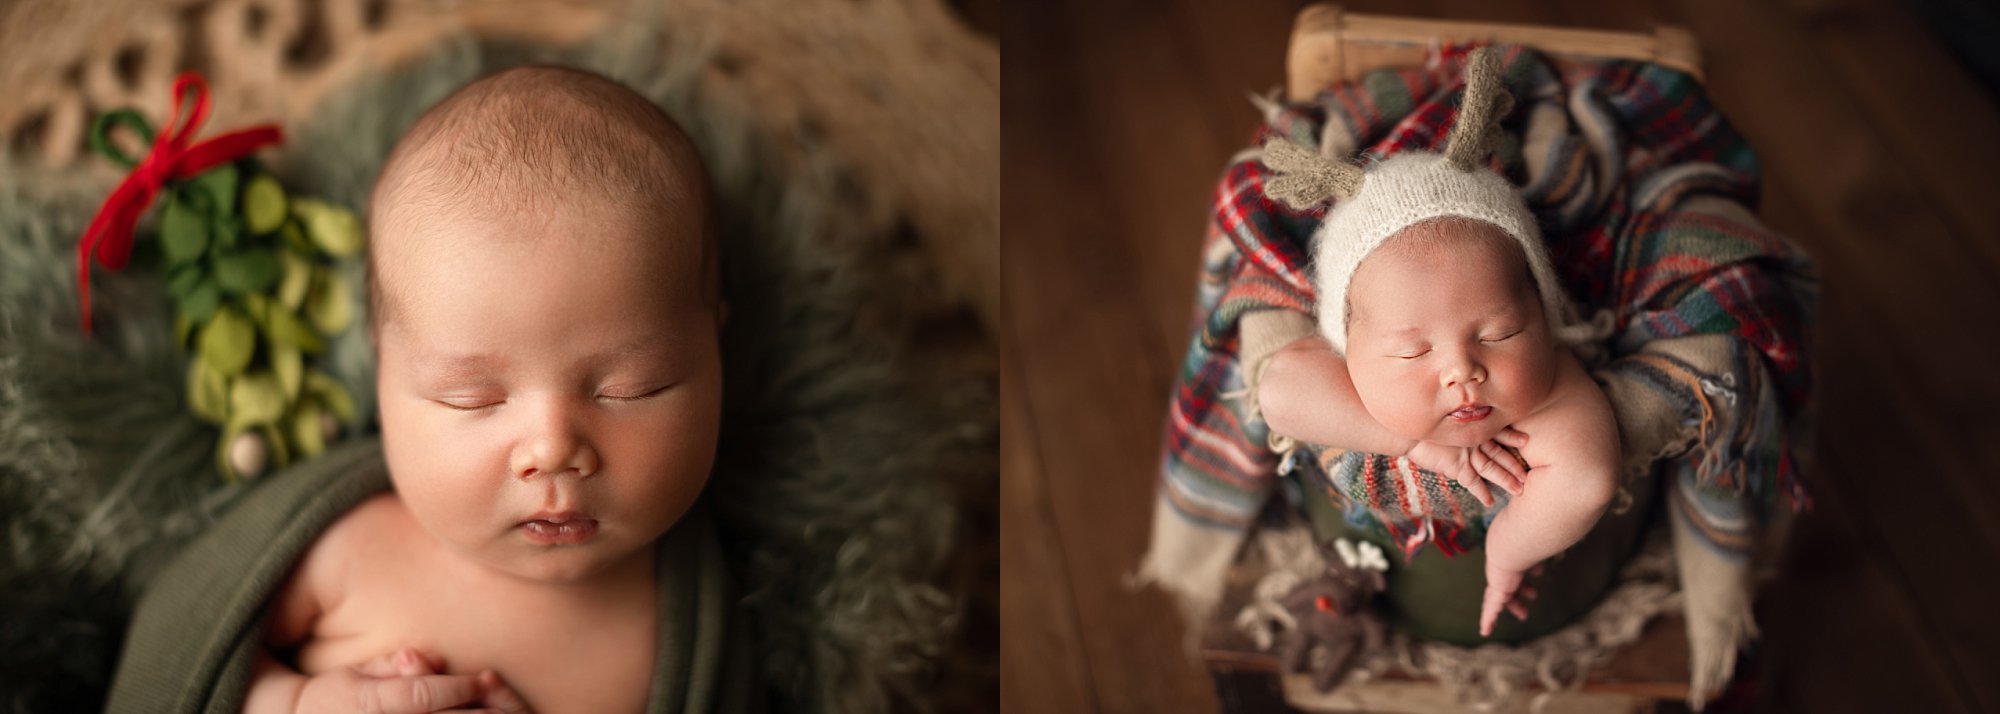 newborn baby with plaid material and mistletoe